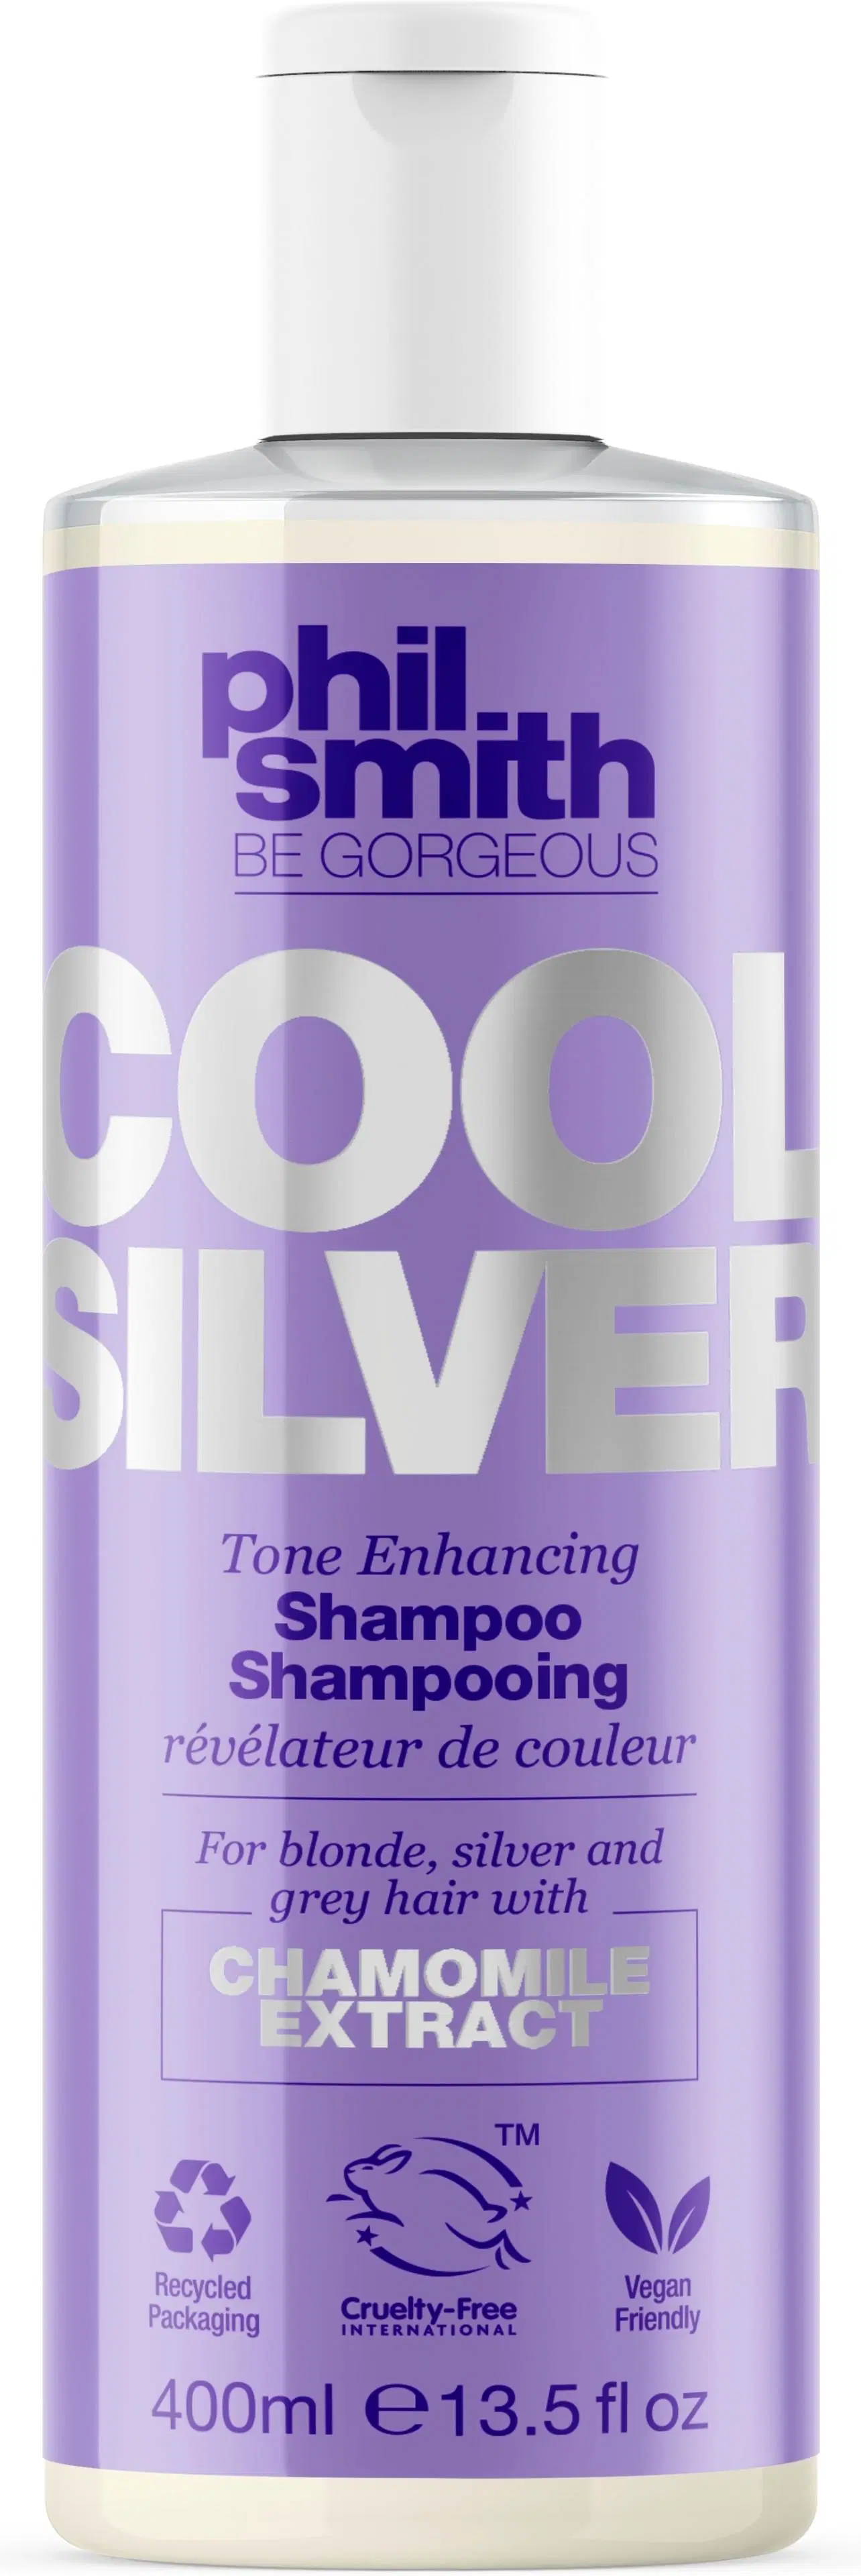 Phil Smith Be Gorgeous Cool Silver Tone Enhancing Shampoo 400ml